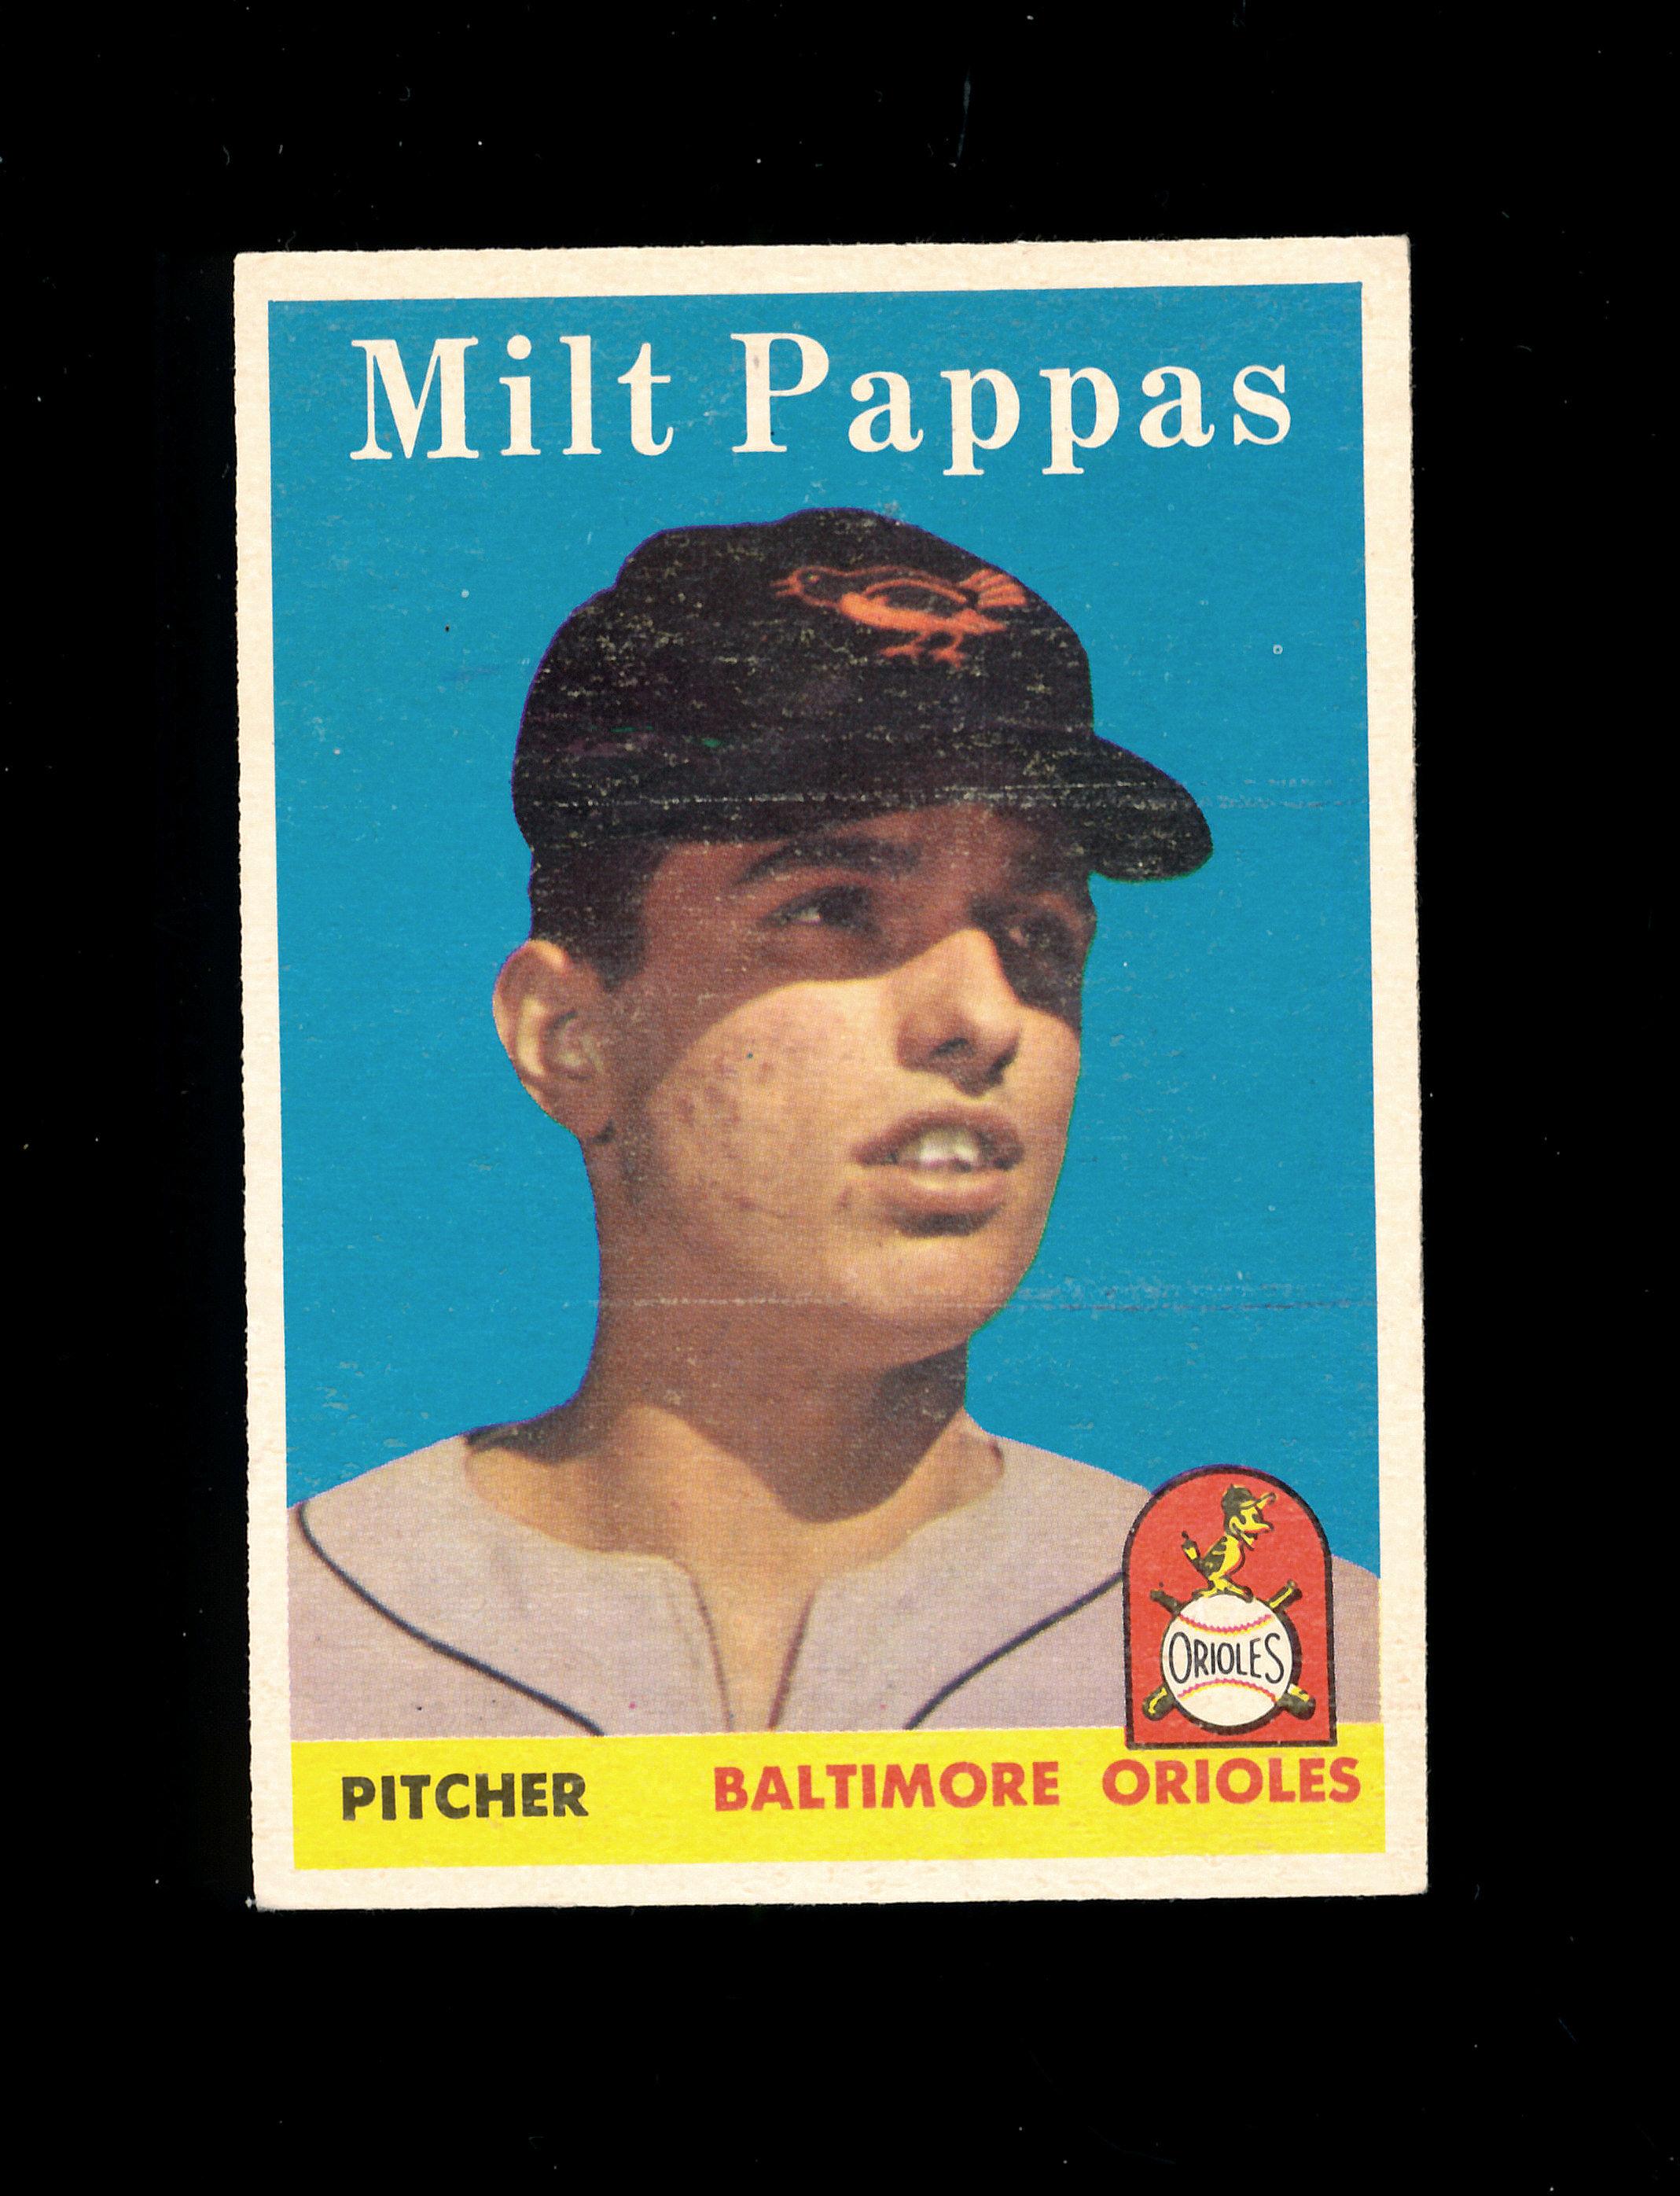 1958 Topps ROOKIE Baseball Card #457 Rookie Milt Pappas Baltimore Orioles.